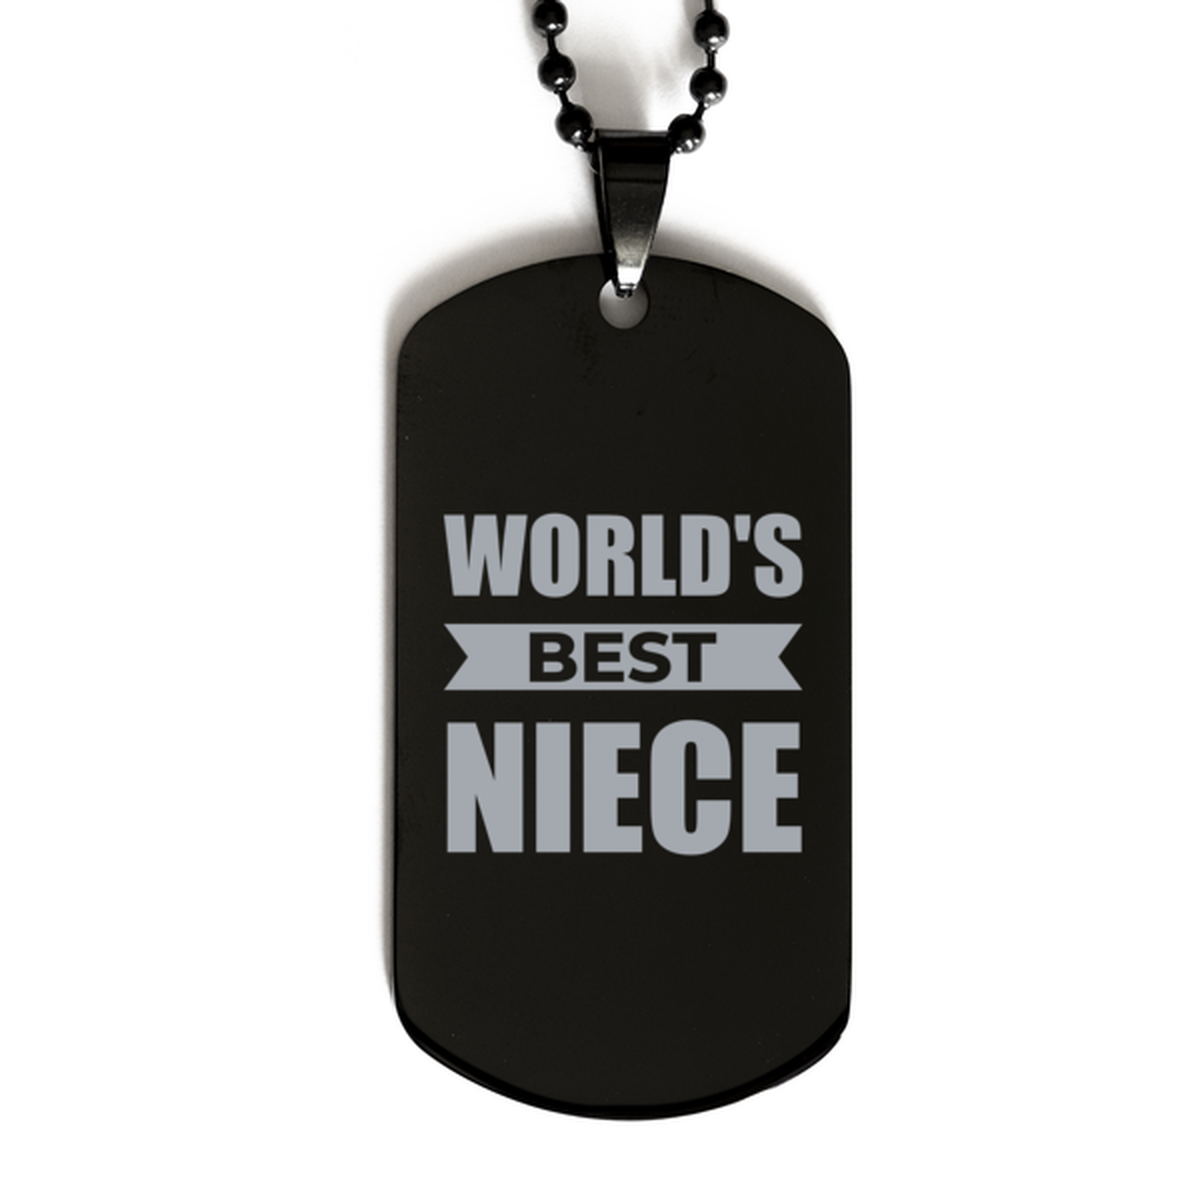 Worlds Best Niece Gifts, Funny Black Engraved Dog Tag For Niece, Birthday Presents For Women